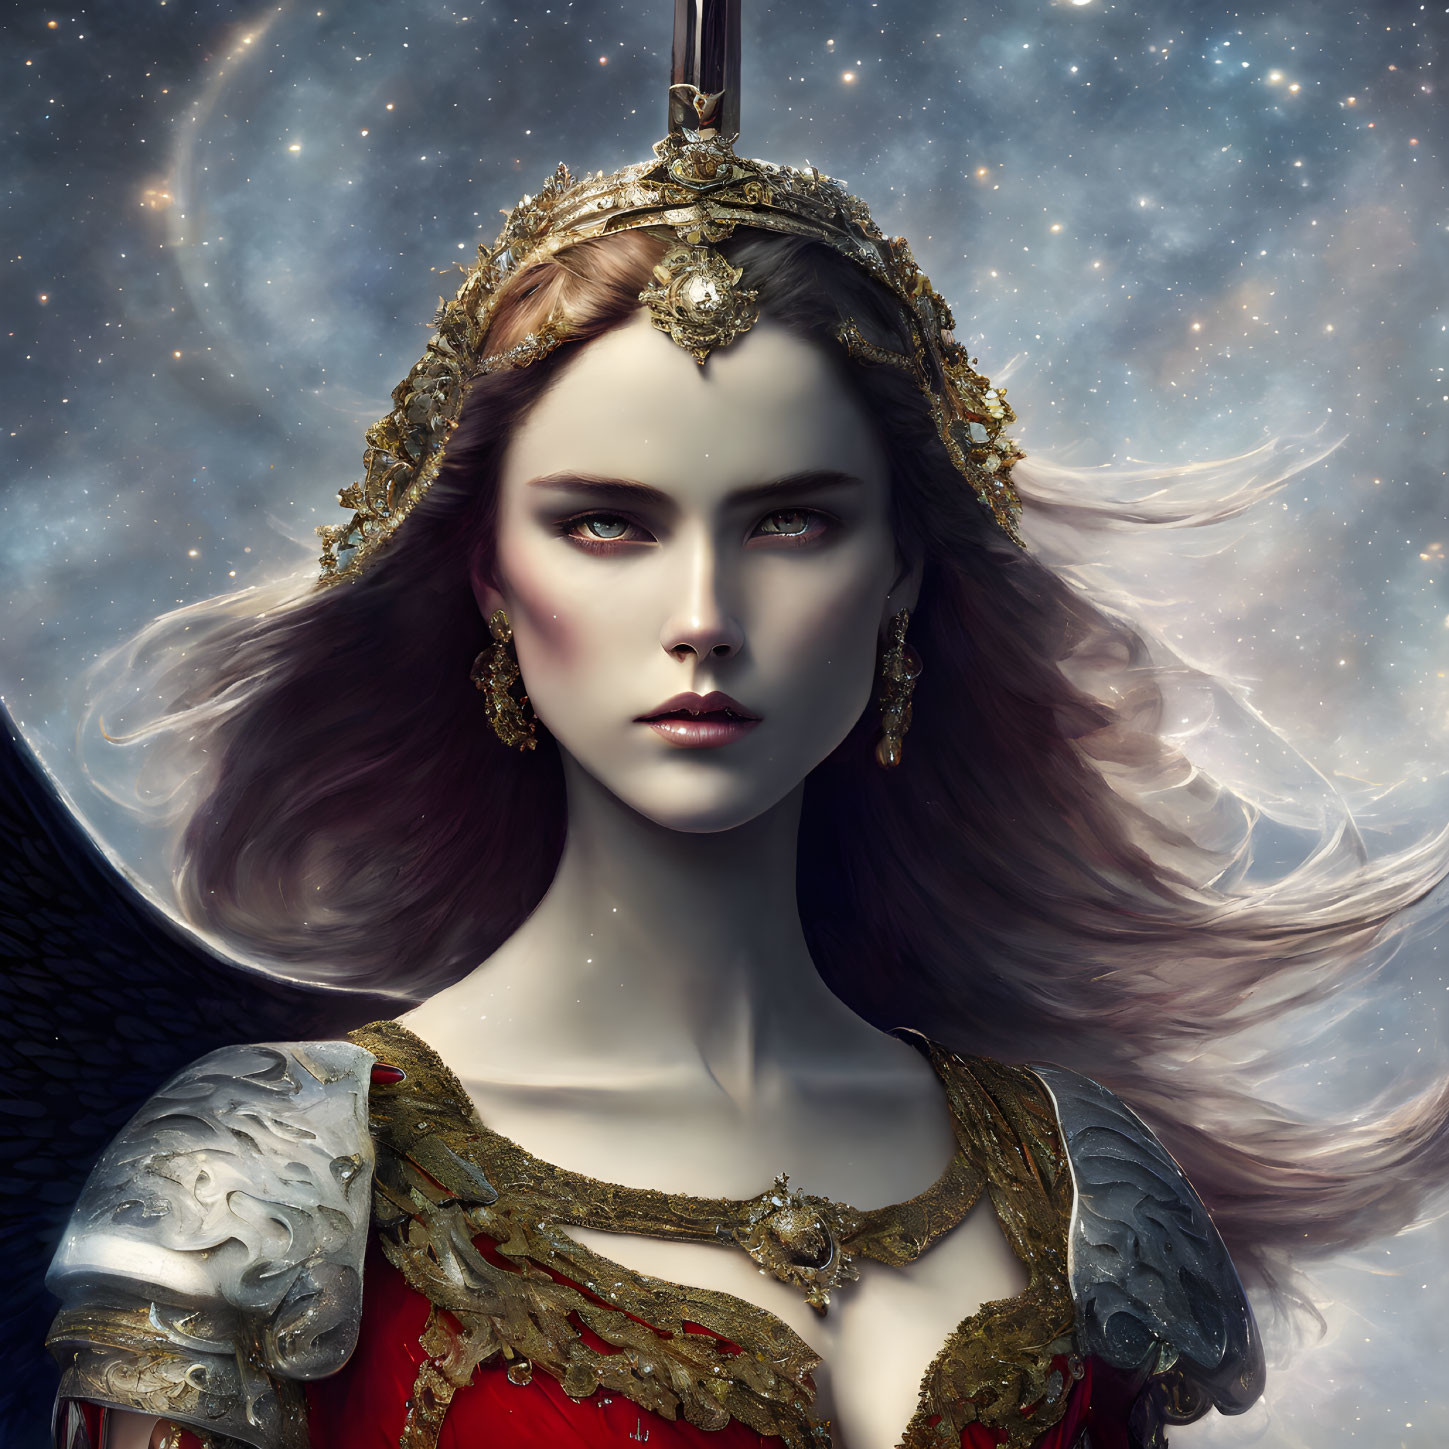 Regal woman in ornate armor and jewelry with intense eyes against celestial backdrop